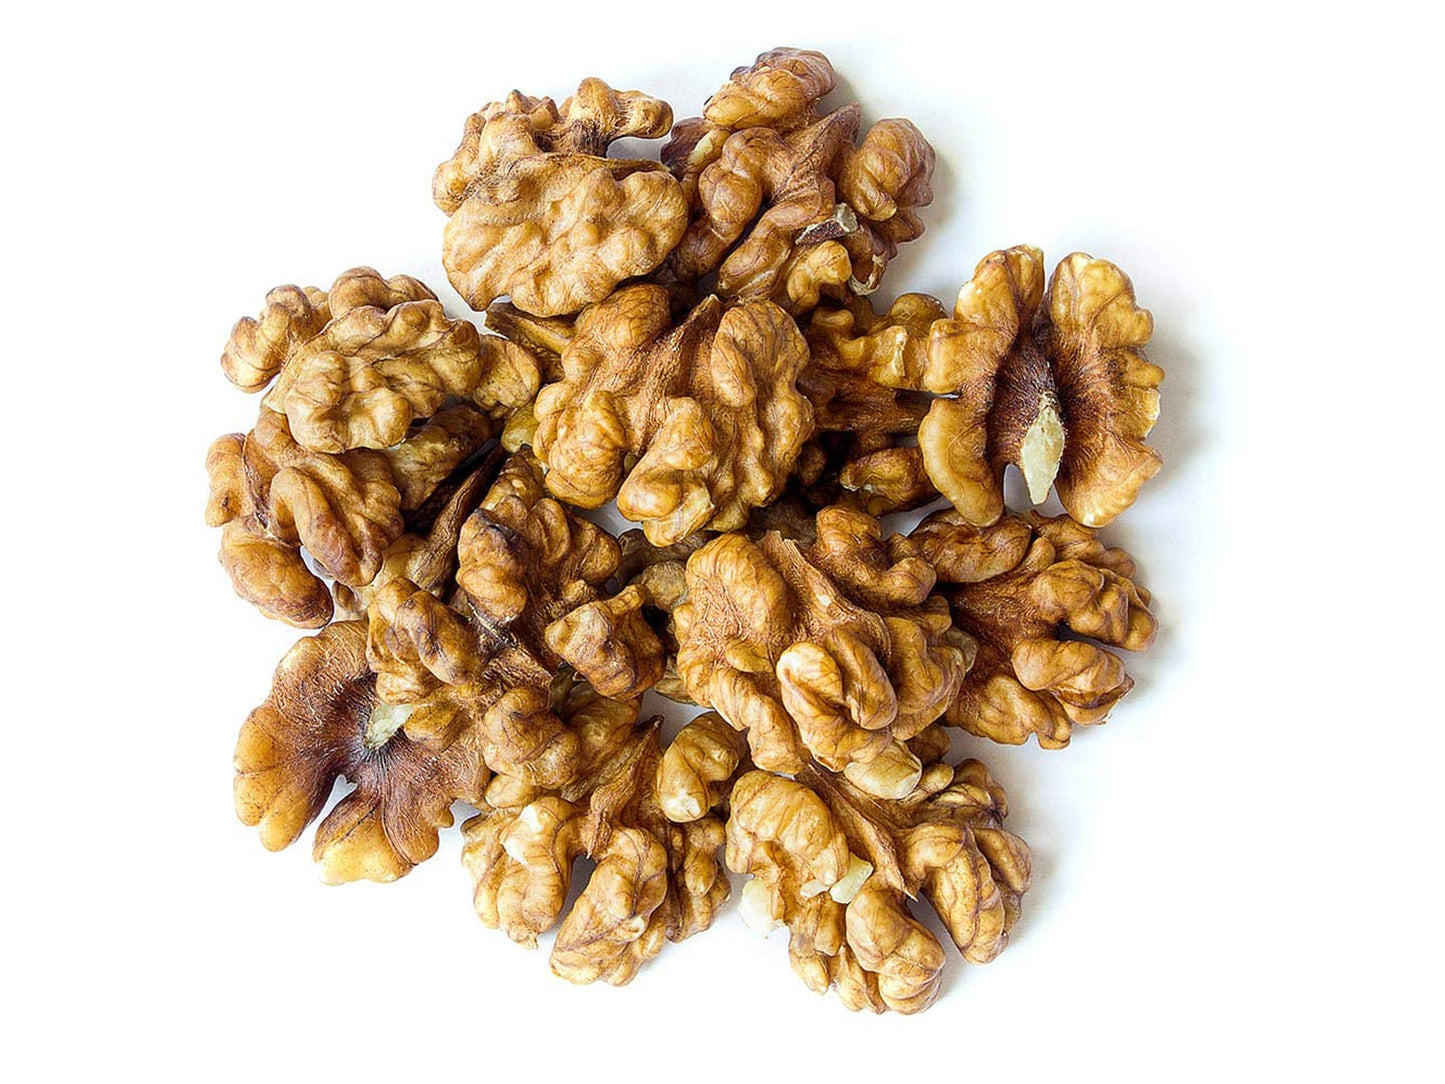 Raw Walnuts — Non-GMO Verified, Raw, Kosher, No Shell, Unsalted, Natural, Sirtfood, Bulk - by Food to Live